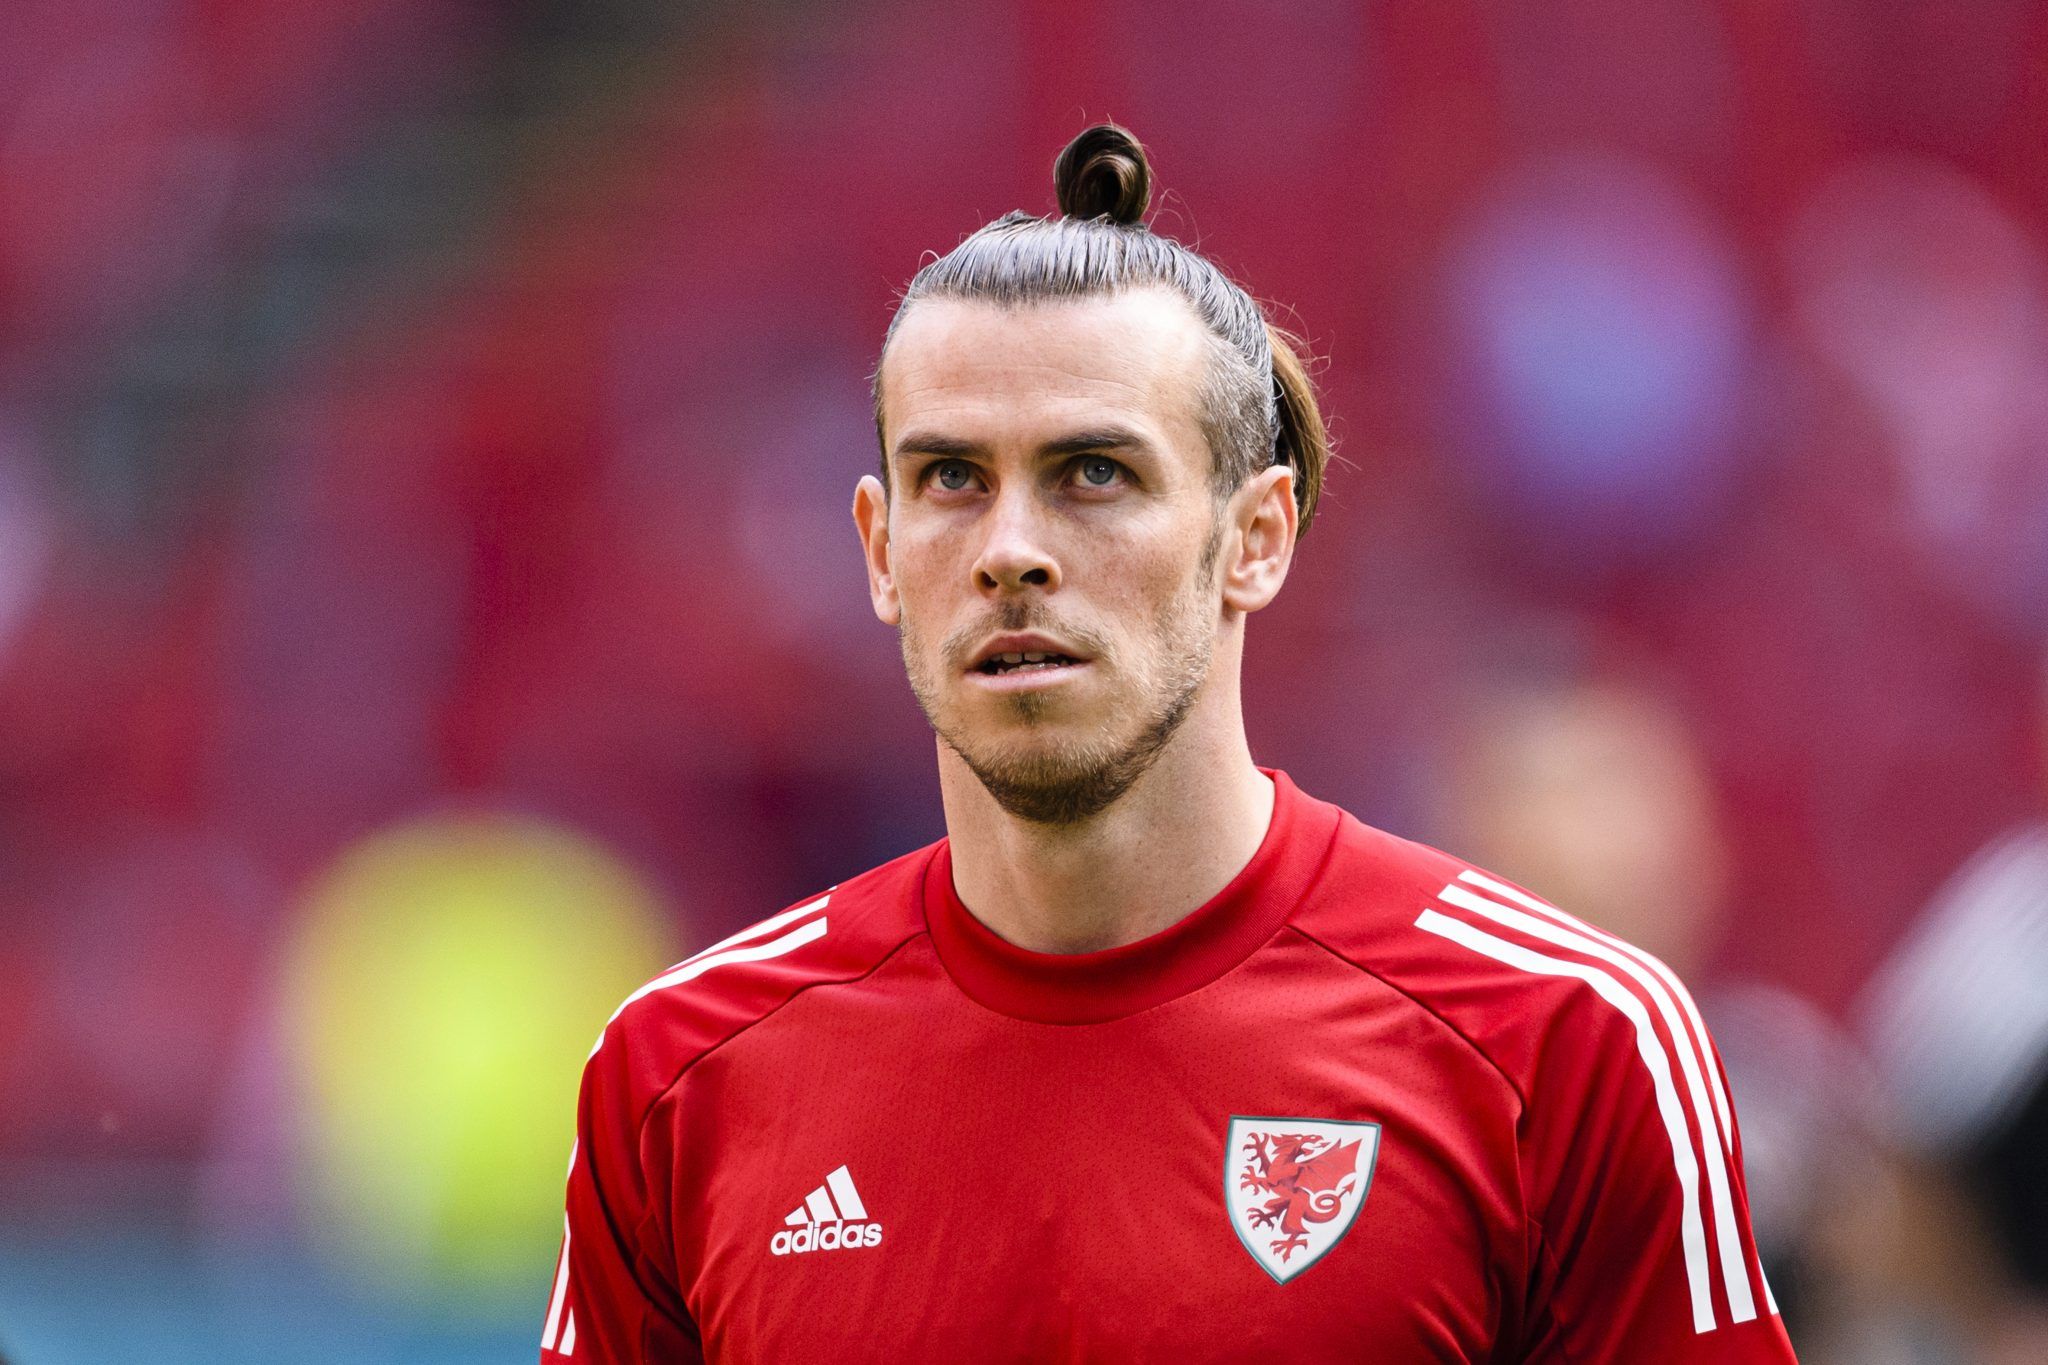 Gareth Bale Given New Squad Number After Losing His Favoured No 11